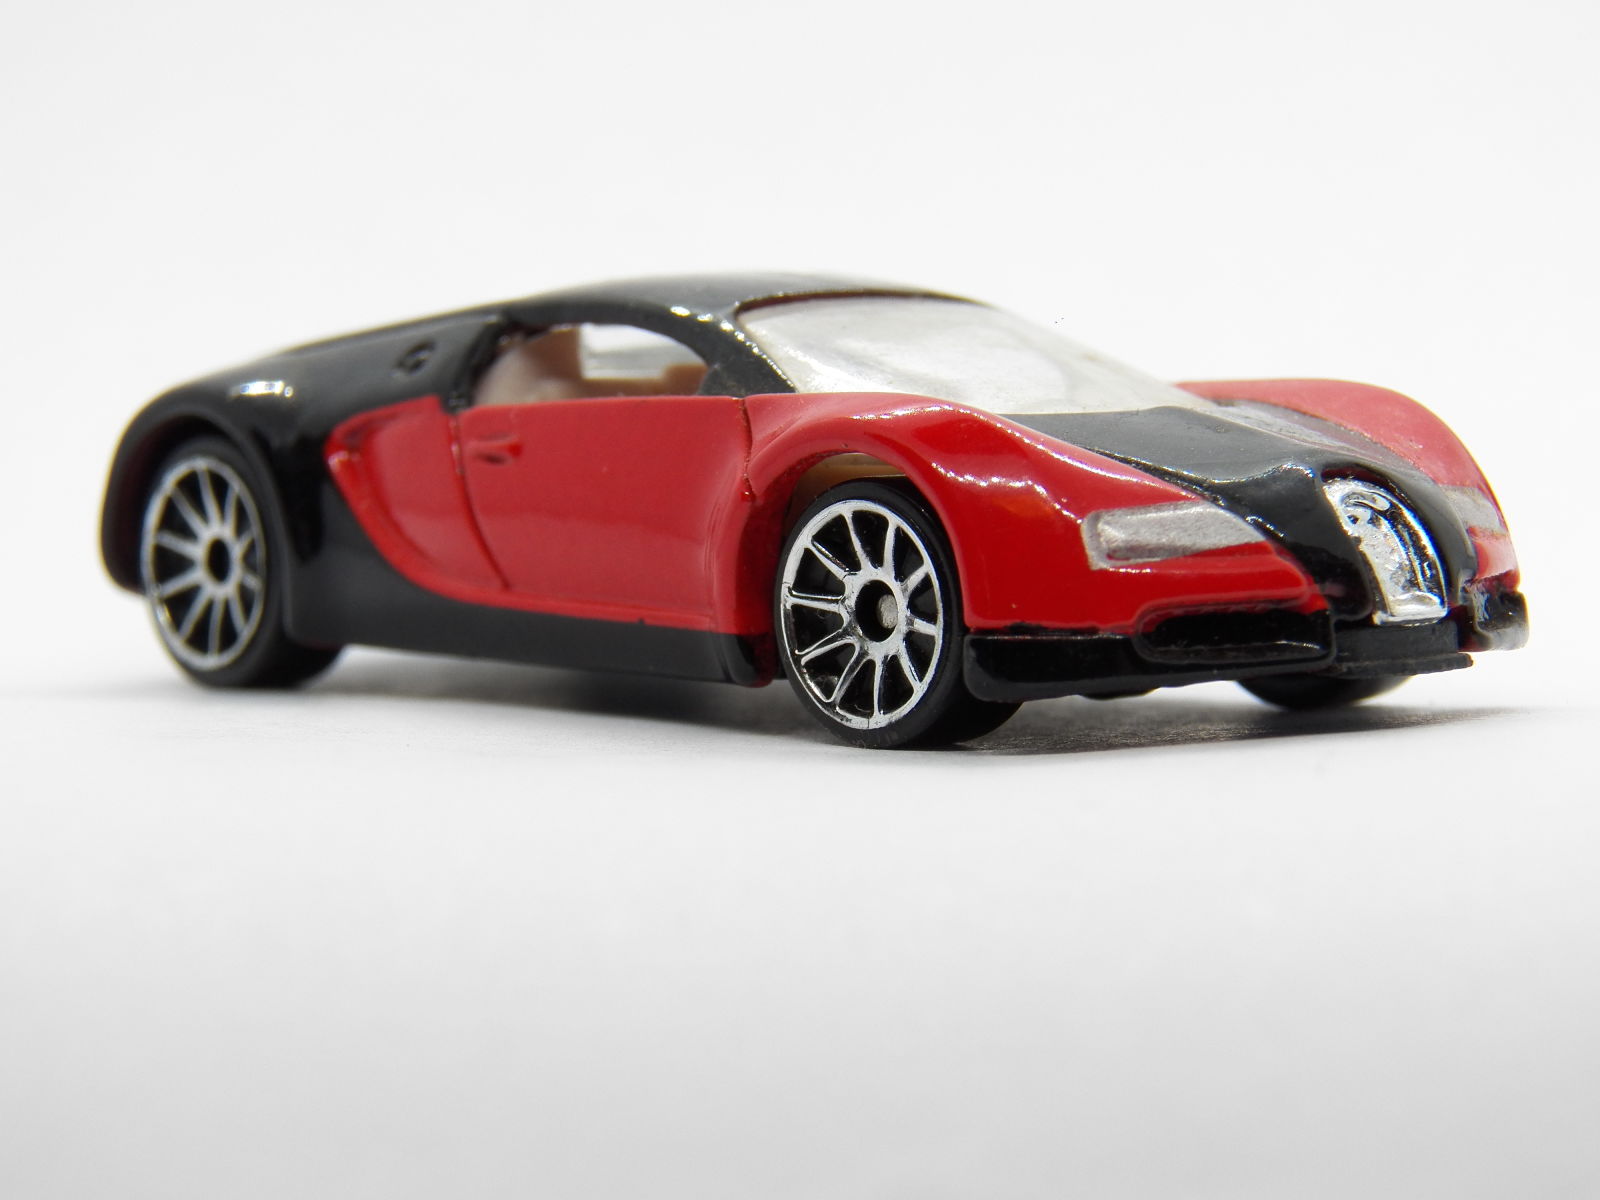 Illustration for article titled Whats in the box? Car #2 HW Bugatti Veyron